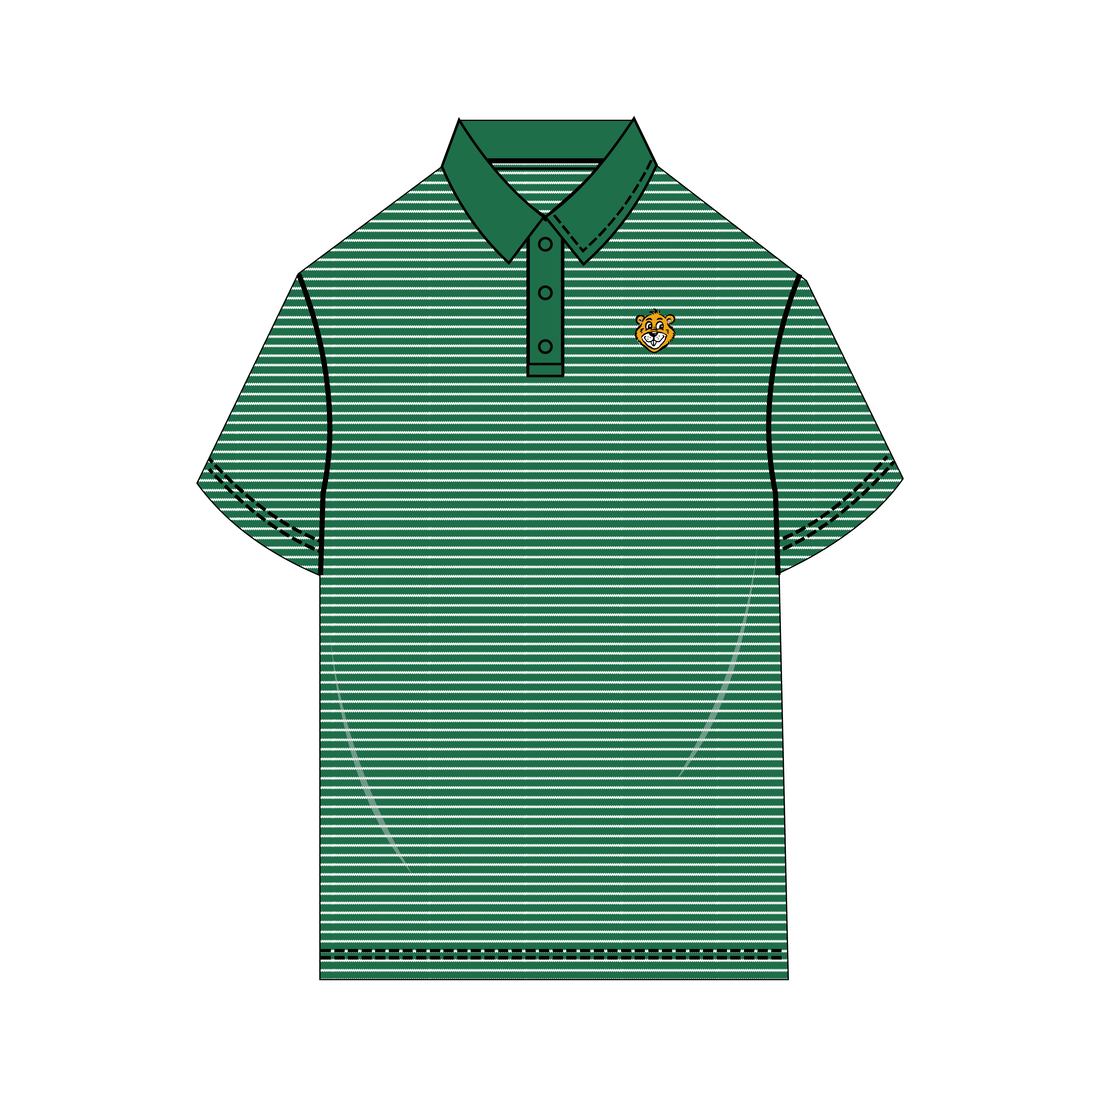 Clubhouse Original: All-Over Patterned Golf Polo